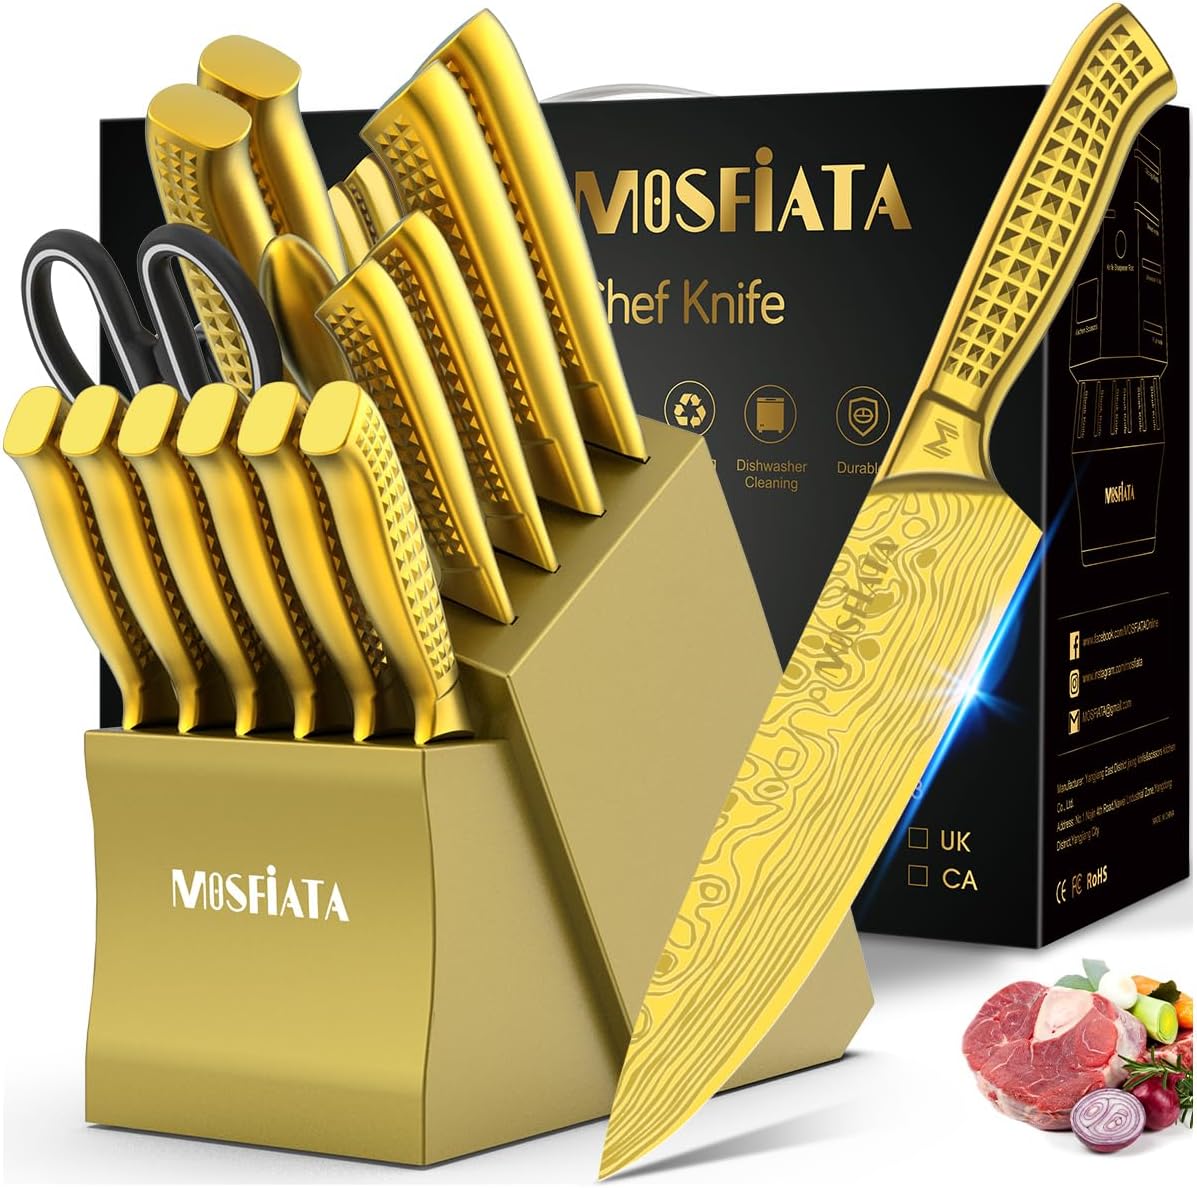 MOSFiATA 8” Super Sharp Titanium Plated Chef's Knife for Kitchen with  Finger Guard and Knife Sharpener in Gift Box, High Carbon German Stainless  Steel EN1.4116 Titanium Coated Stylish Cooking Knife 